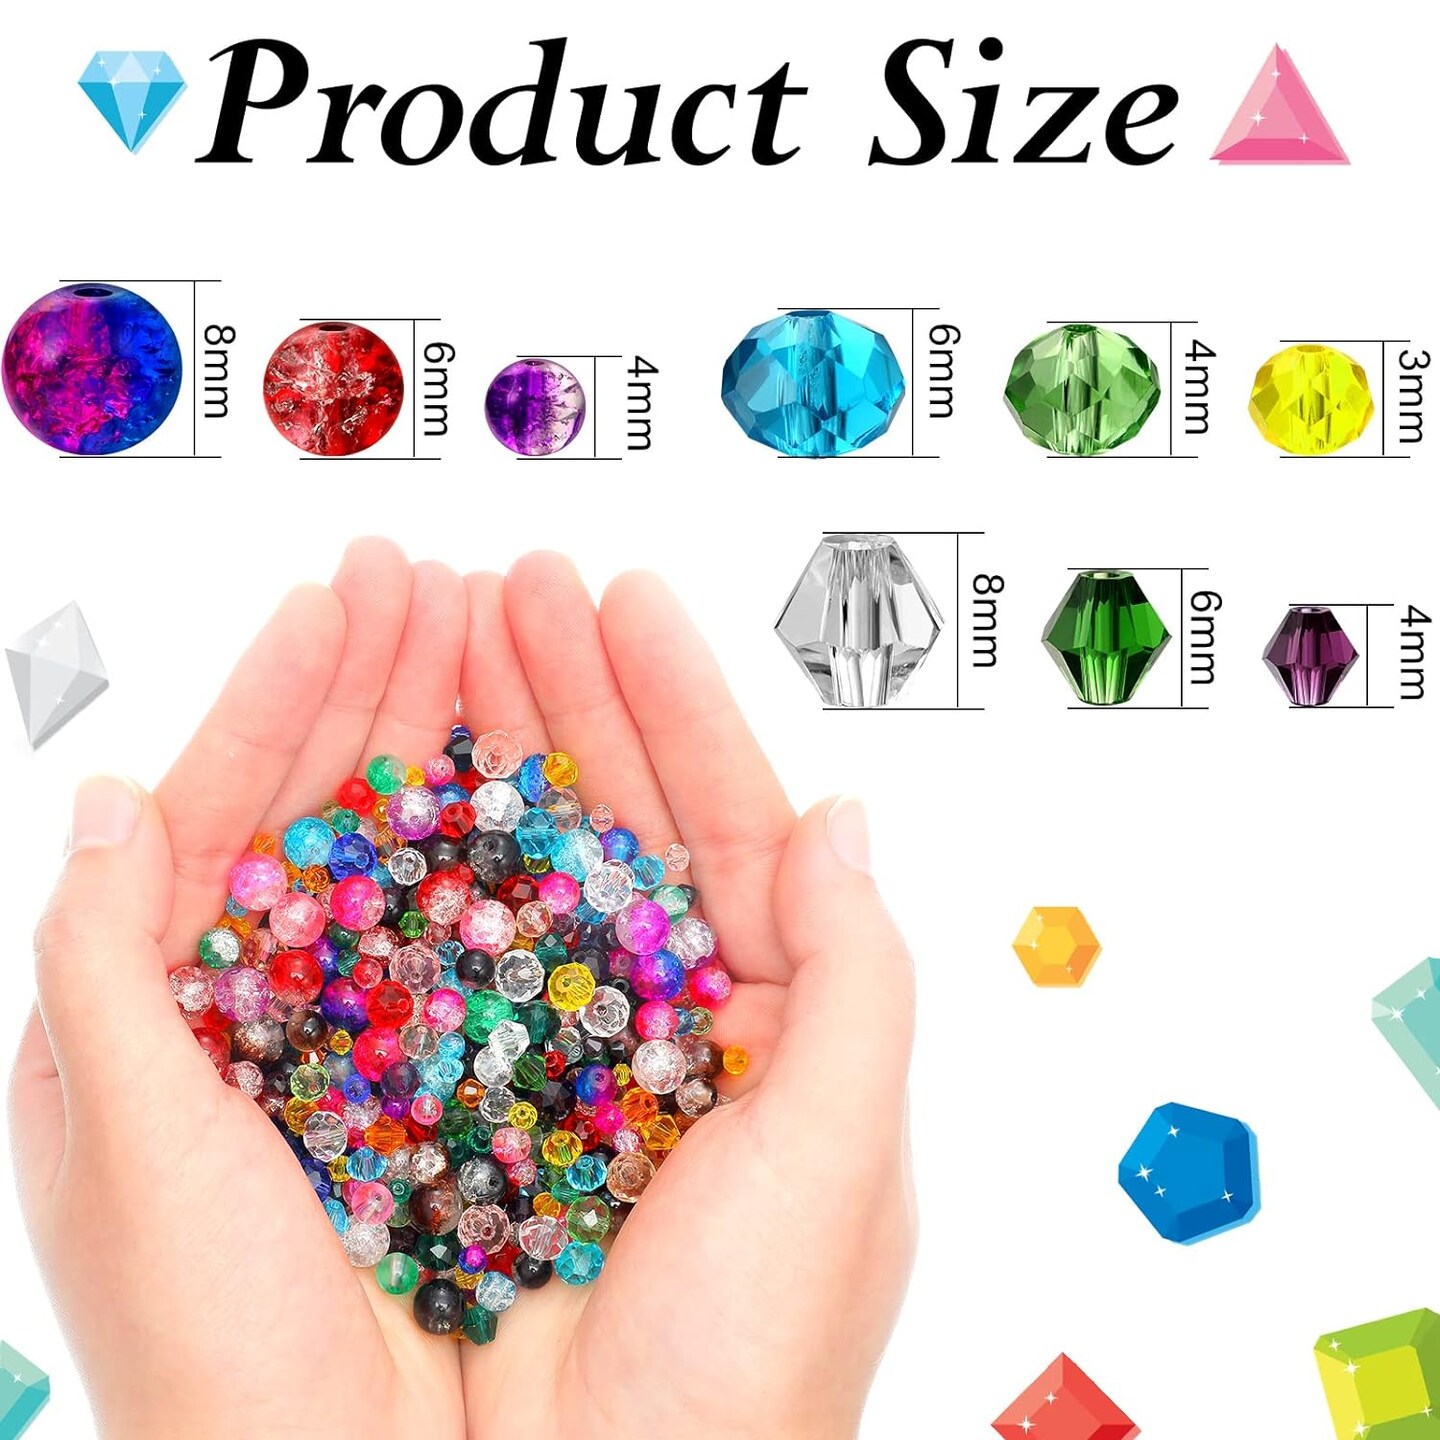 1300 Pieces Crystal Beads For Jewelry Making Crackle Glass Beads Faceted Crystal Glass Beads Bicone Crystal Beads Loose Beads Sparkly Beads For Bracelets Necklace Pendants Making Supplies